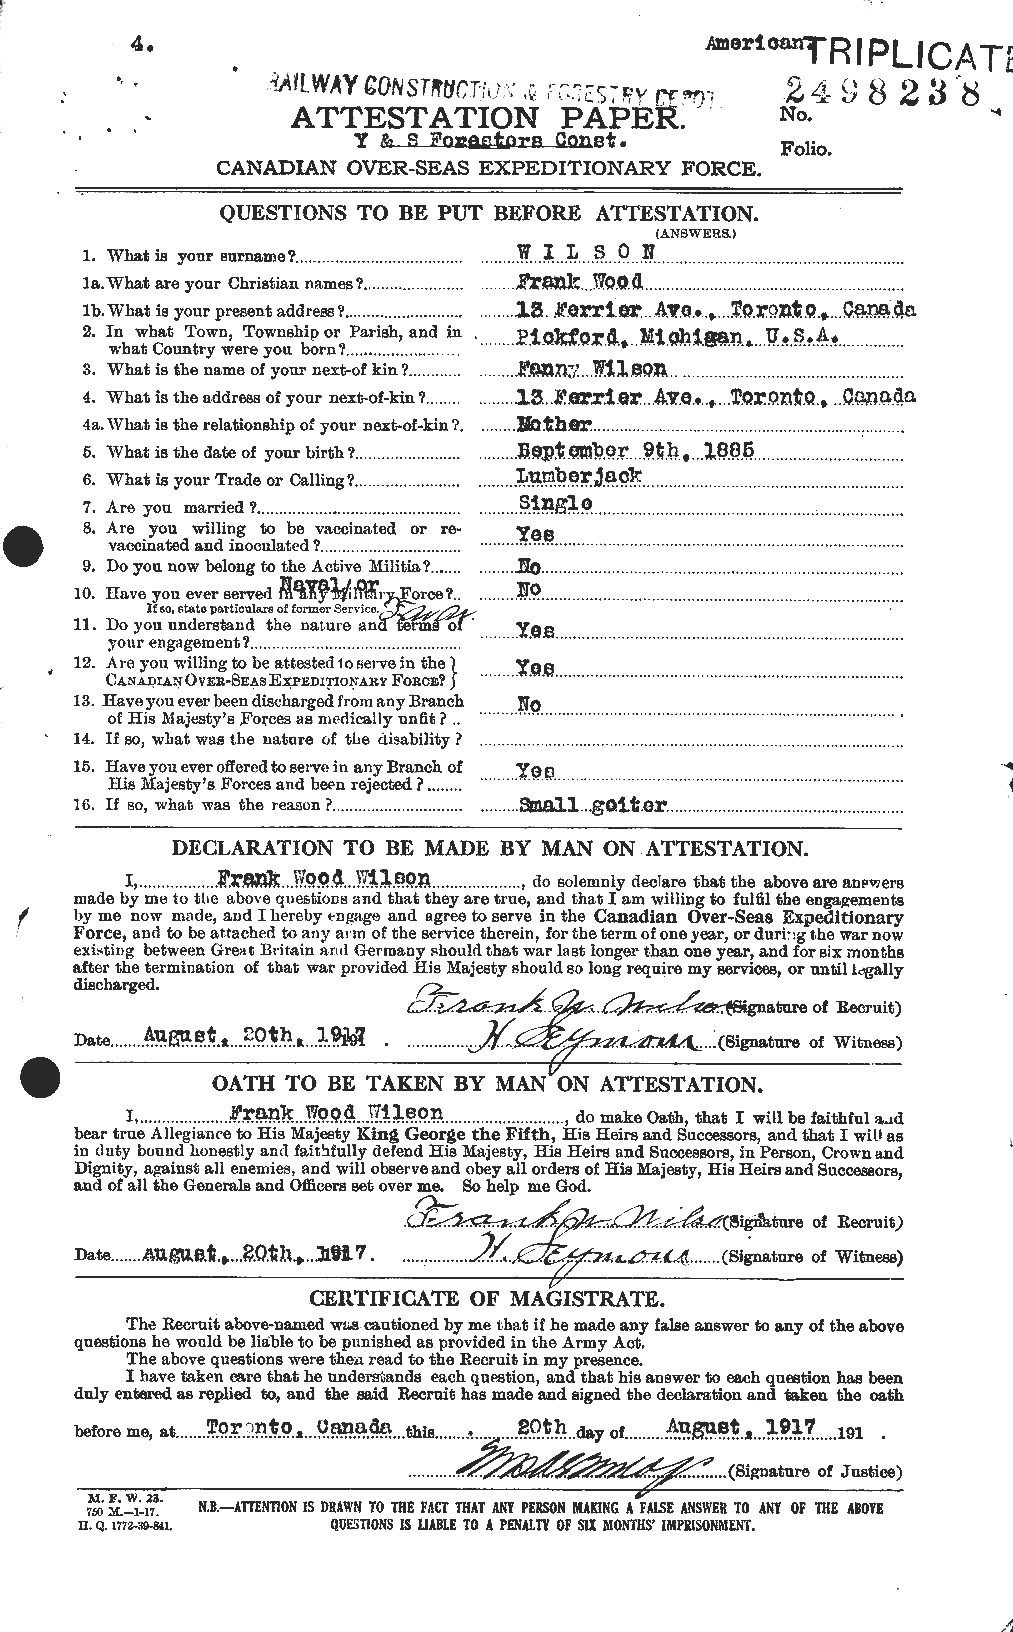 Personnel Records of the First World War - CEF 680686a